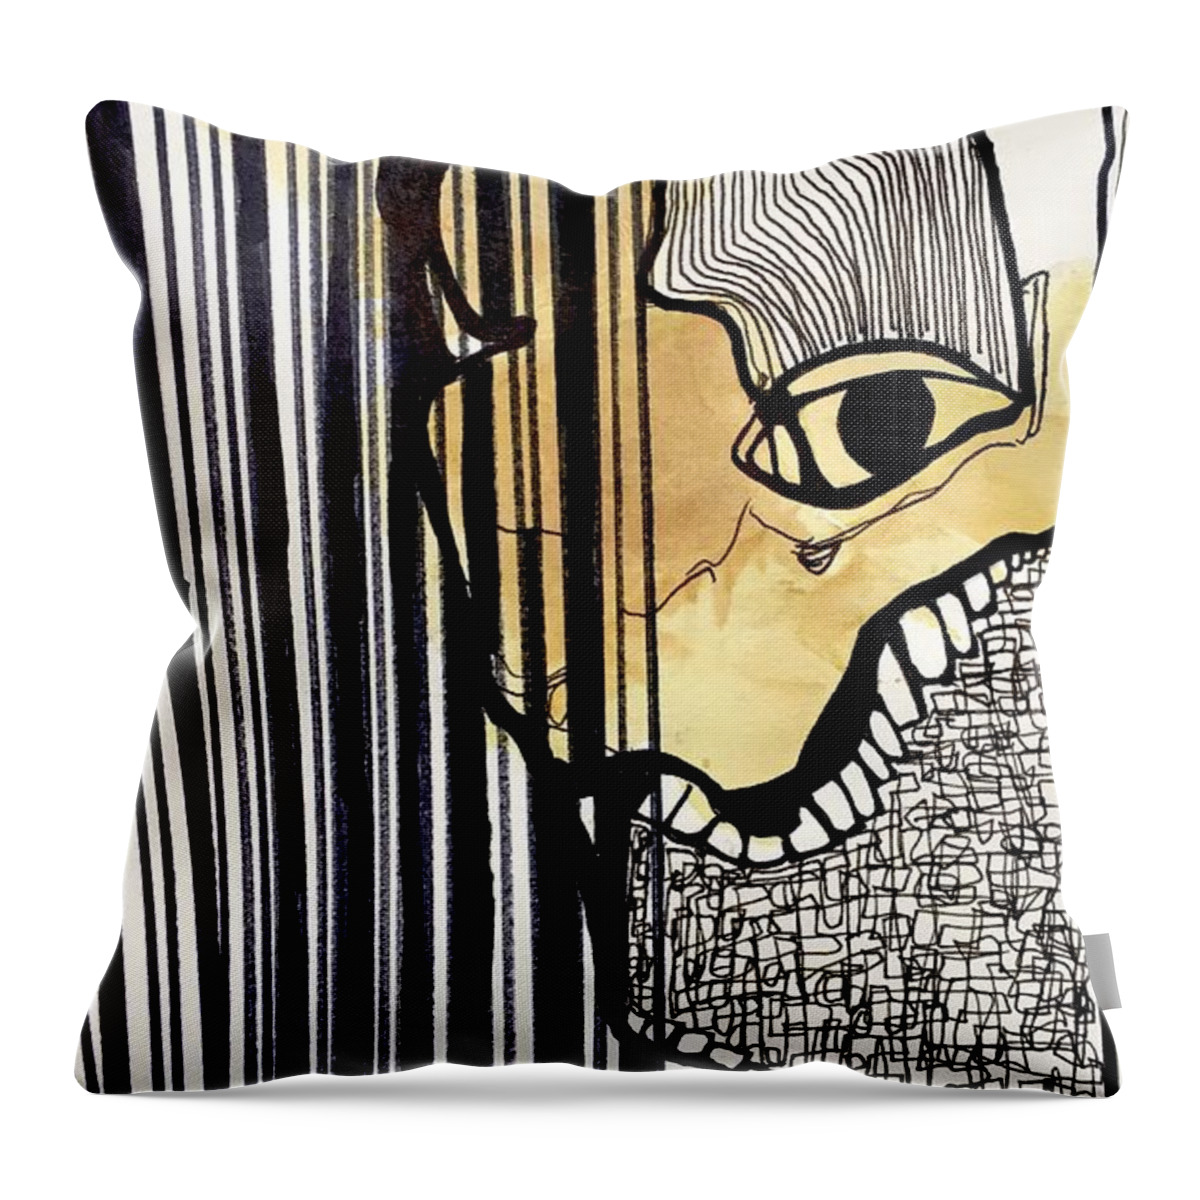 Contemporary Art Throw Pillow featuring the drawing Untitled #8 by Jeremiah Ray